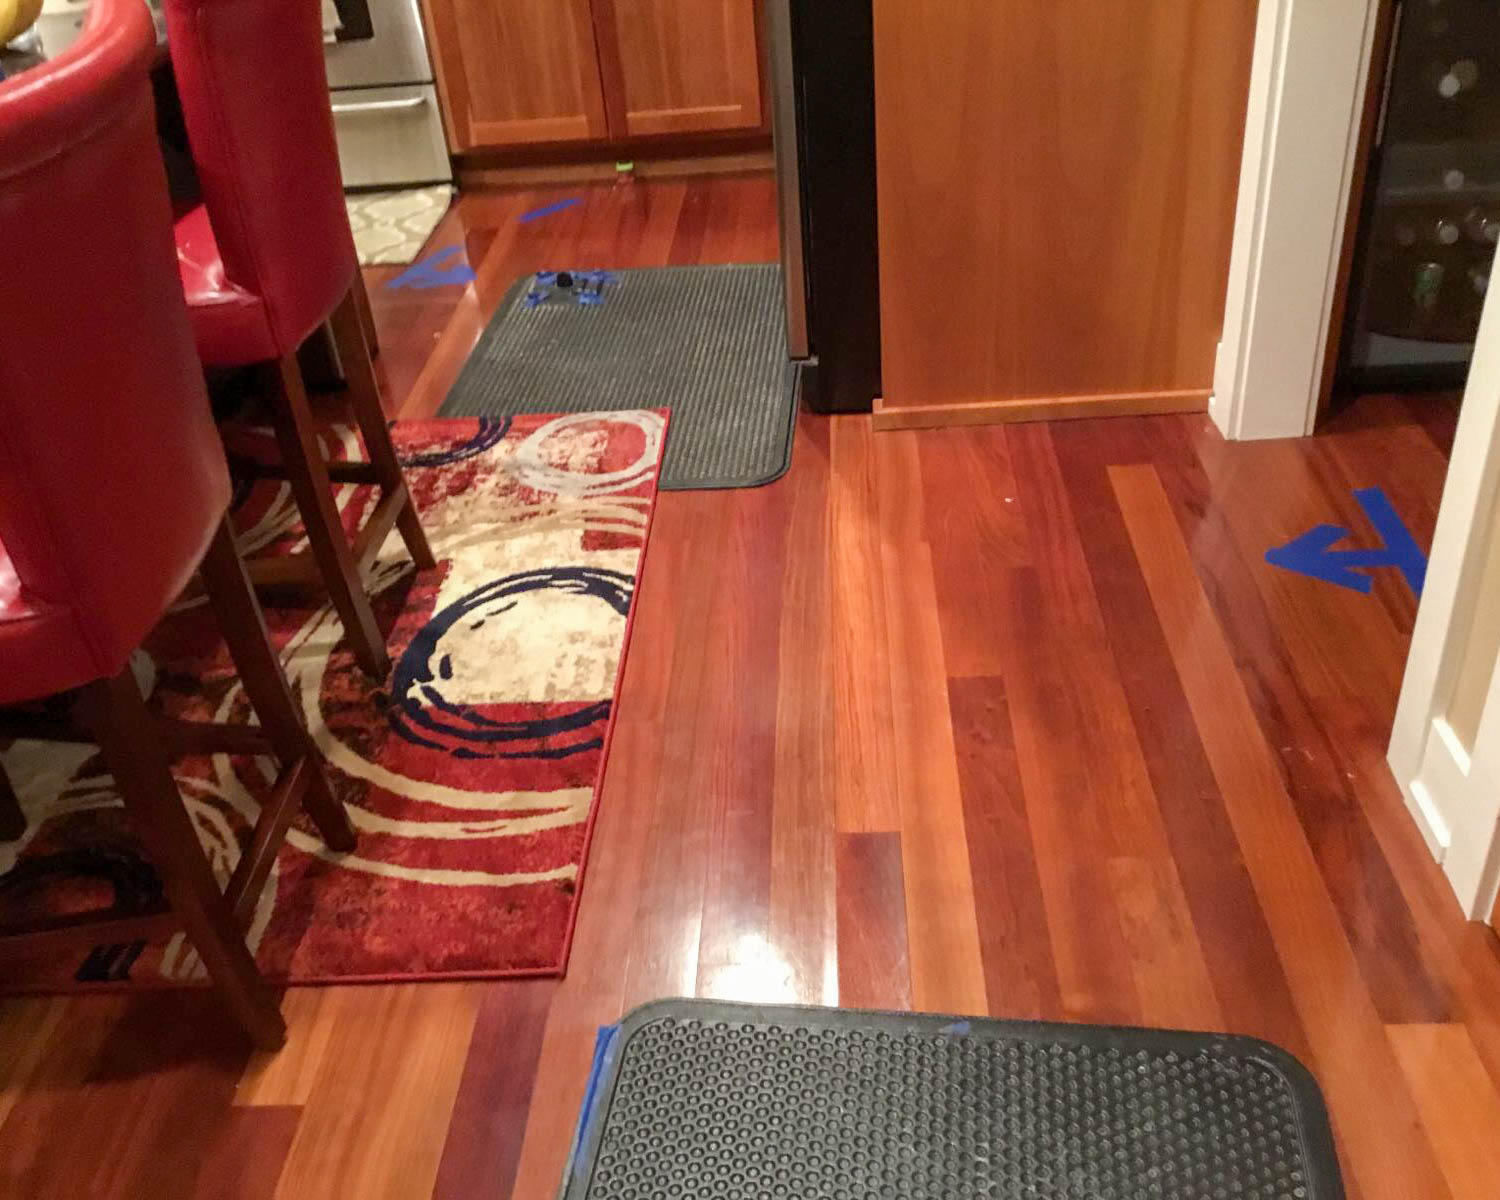 Wood floors can be especially susceptible to water damage, but SERVPRO is here to help!